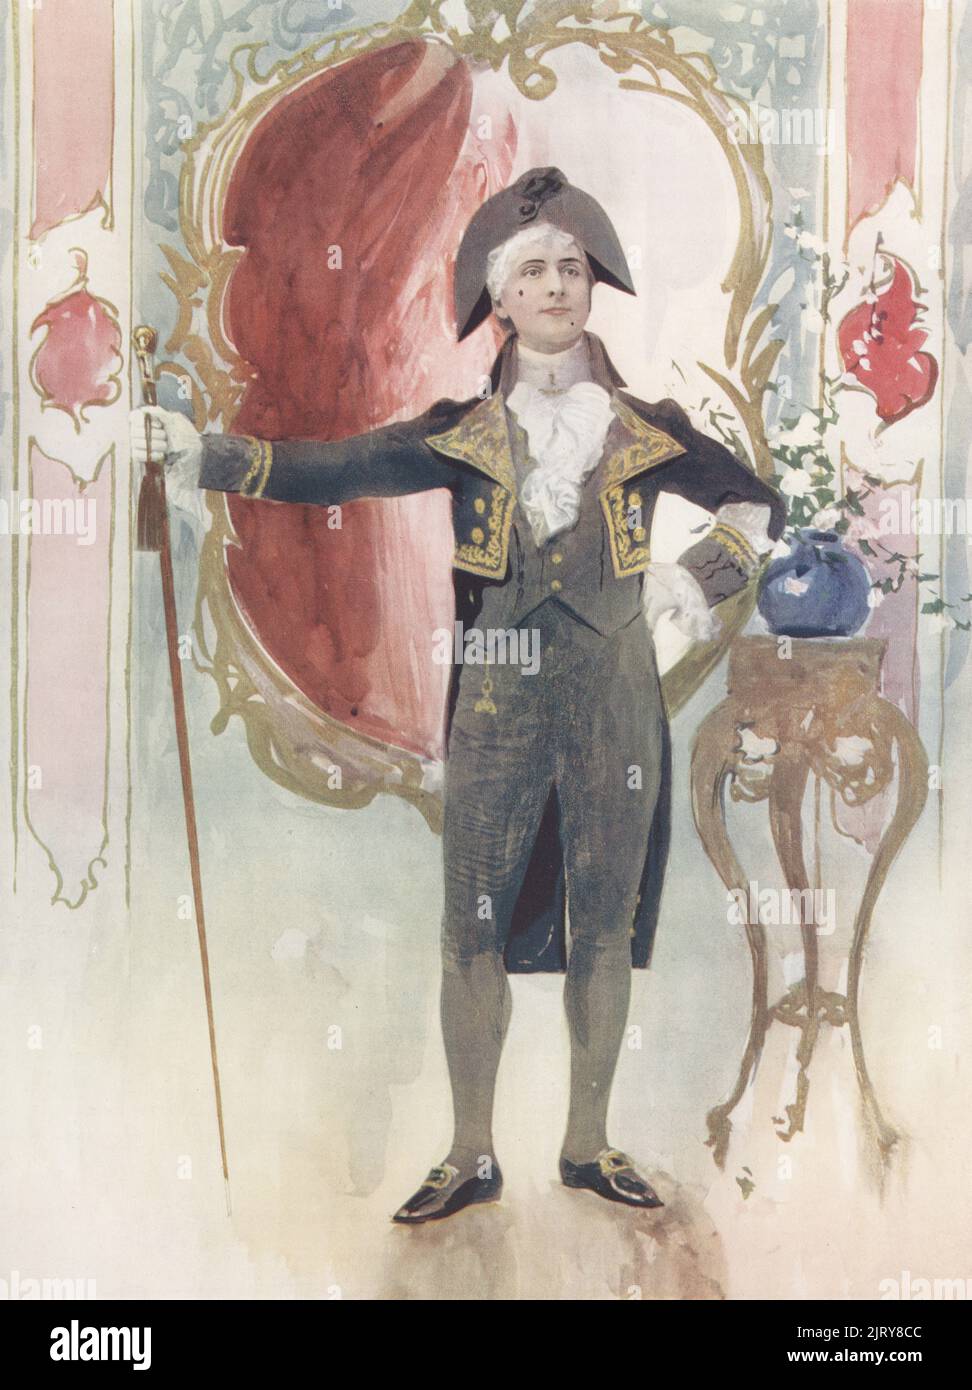 Hayden Coffin as Geoffrey Challoner in A Country Girl, musical by James Tanner and Lionel Monckton at Daly's Theatre, 1903. Charles Hayden Coffin, English actor and singer in Edwardian musical comedy, 1862-1935. Photograph by Alfred Ellis and Walery (Stanislaw Julian Ignacy). Colour printing of a hand-coloured illustration based on a monochrome photograph from George Newnes’s Players of the Day, London, 1905. Stock Photo